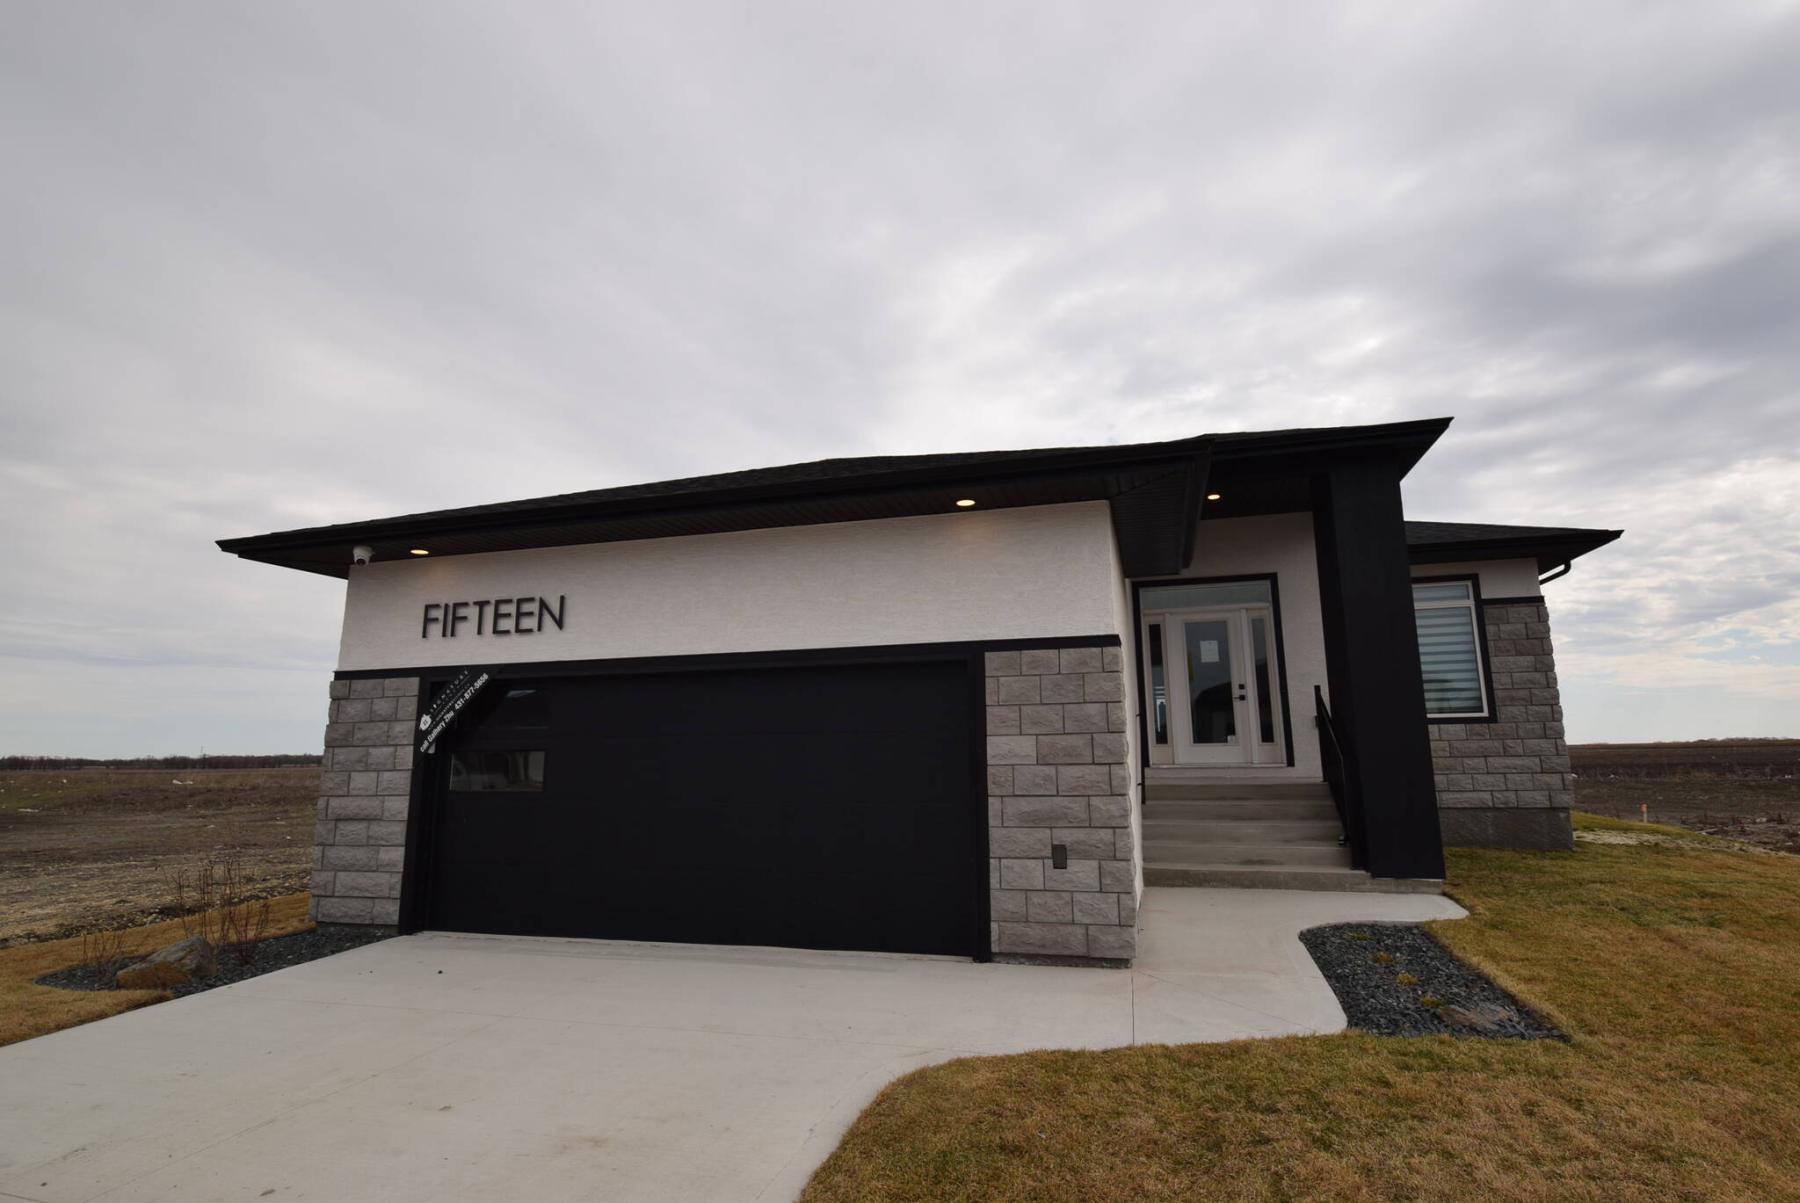  <p>The Capilano blends beautifully into its countrified surroundings, with an exterior finished with stone cladding, acrylic stucco, and a black garage door and pillar for good measure.</p> 